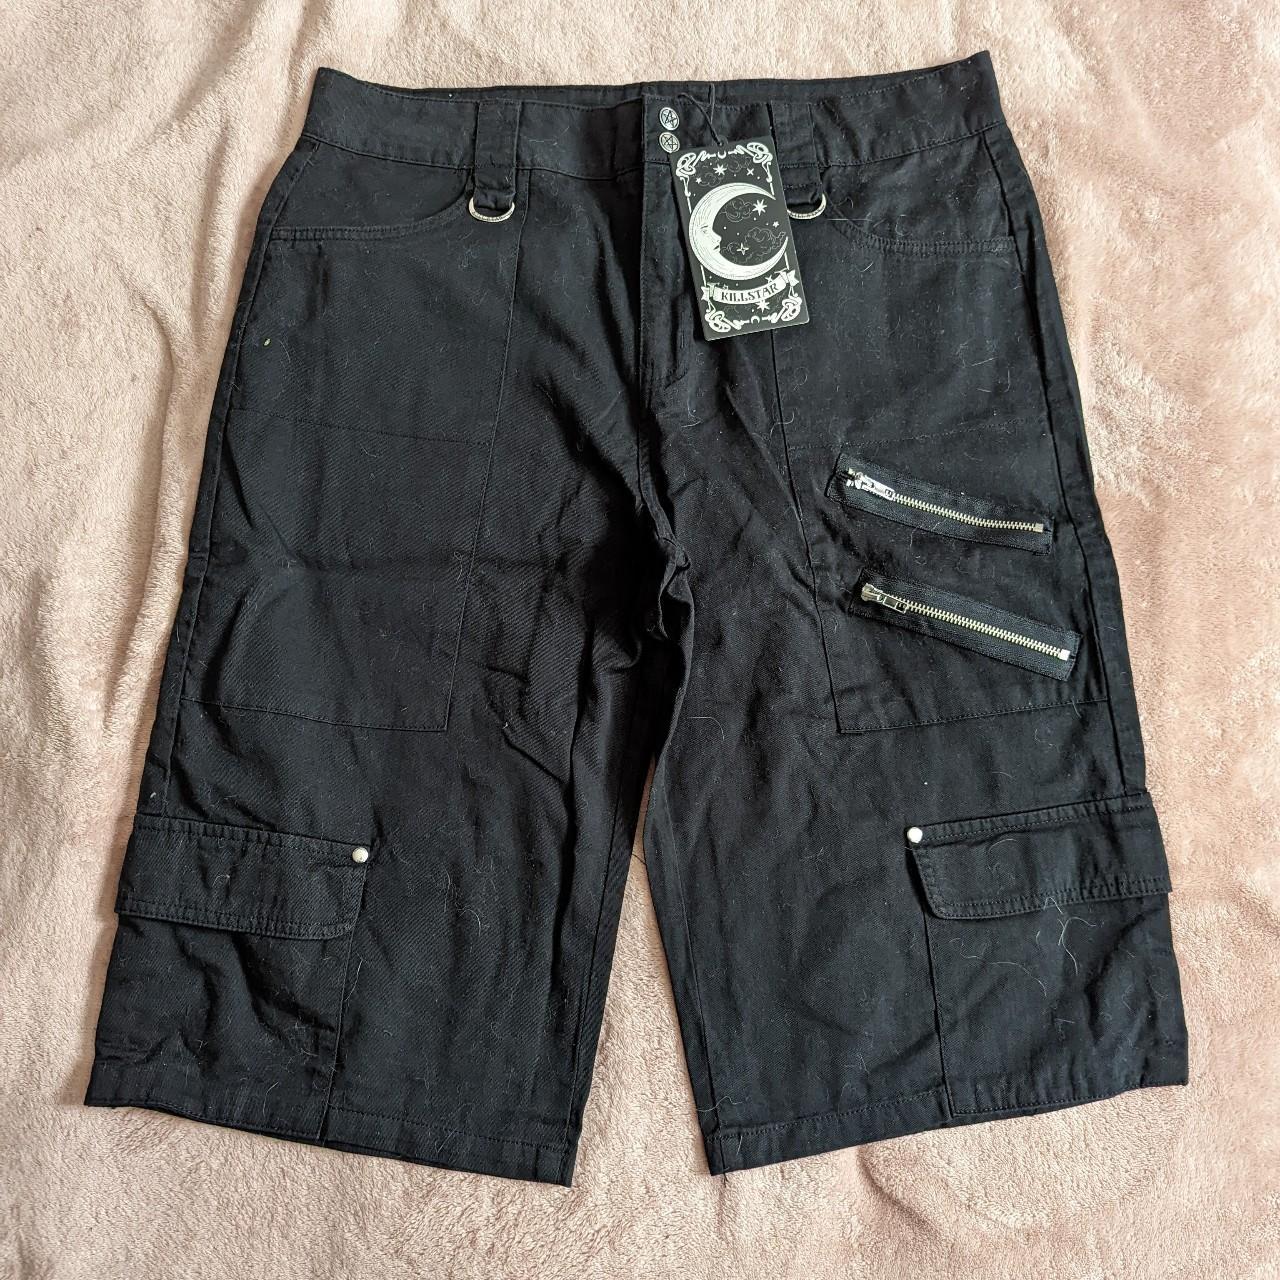 Men's Cargo Cult Shorts size XL and XXL available... - Depop